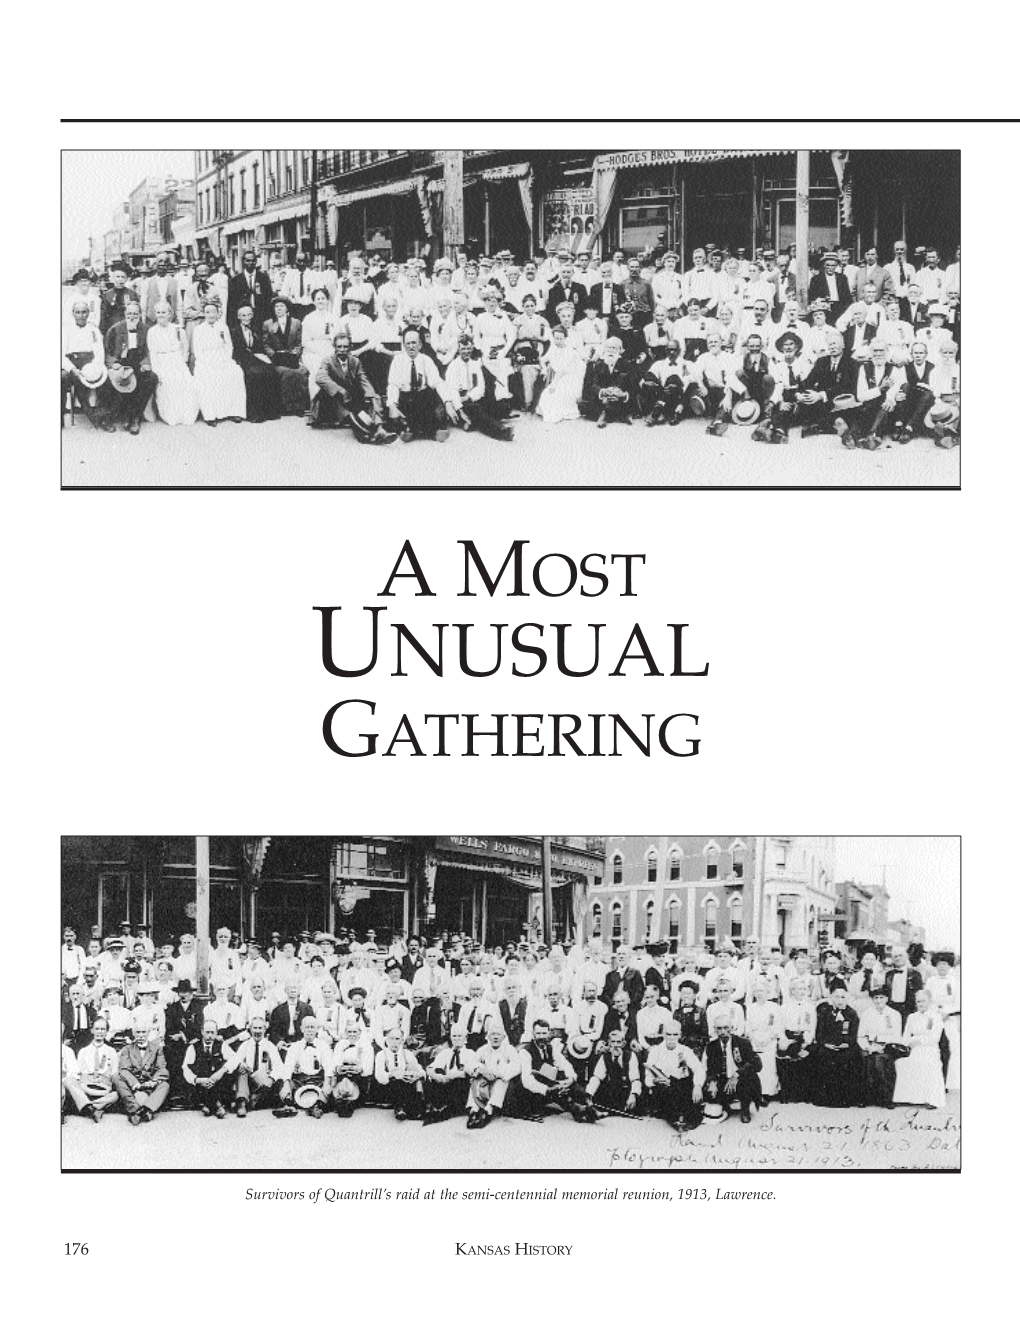 A Most Unusual Gathering